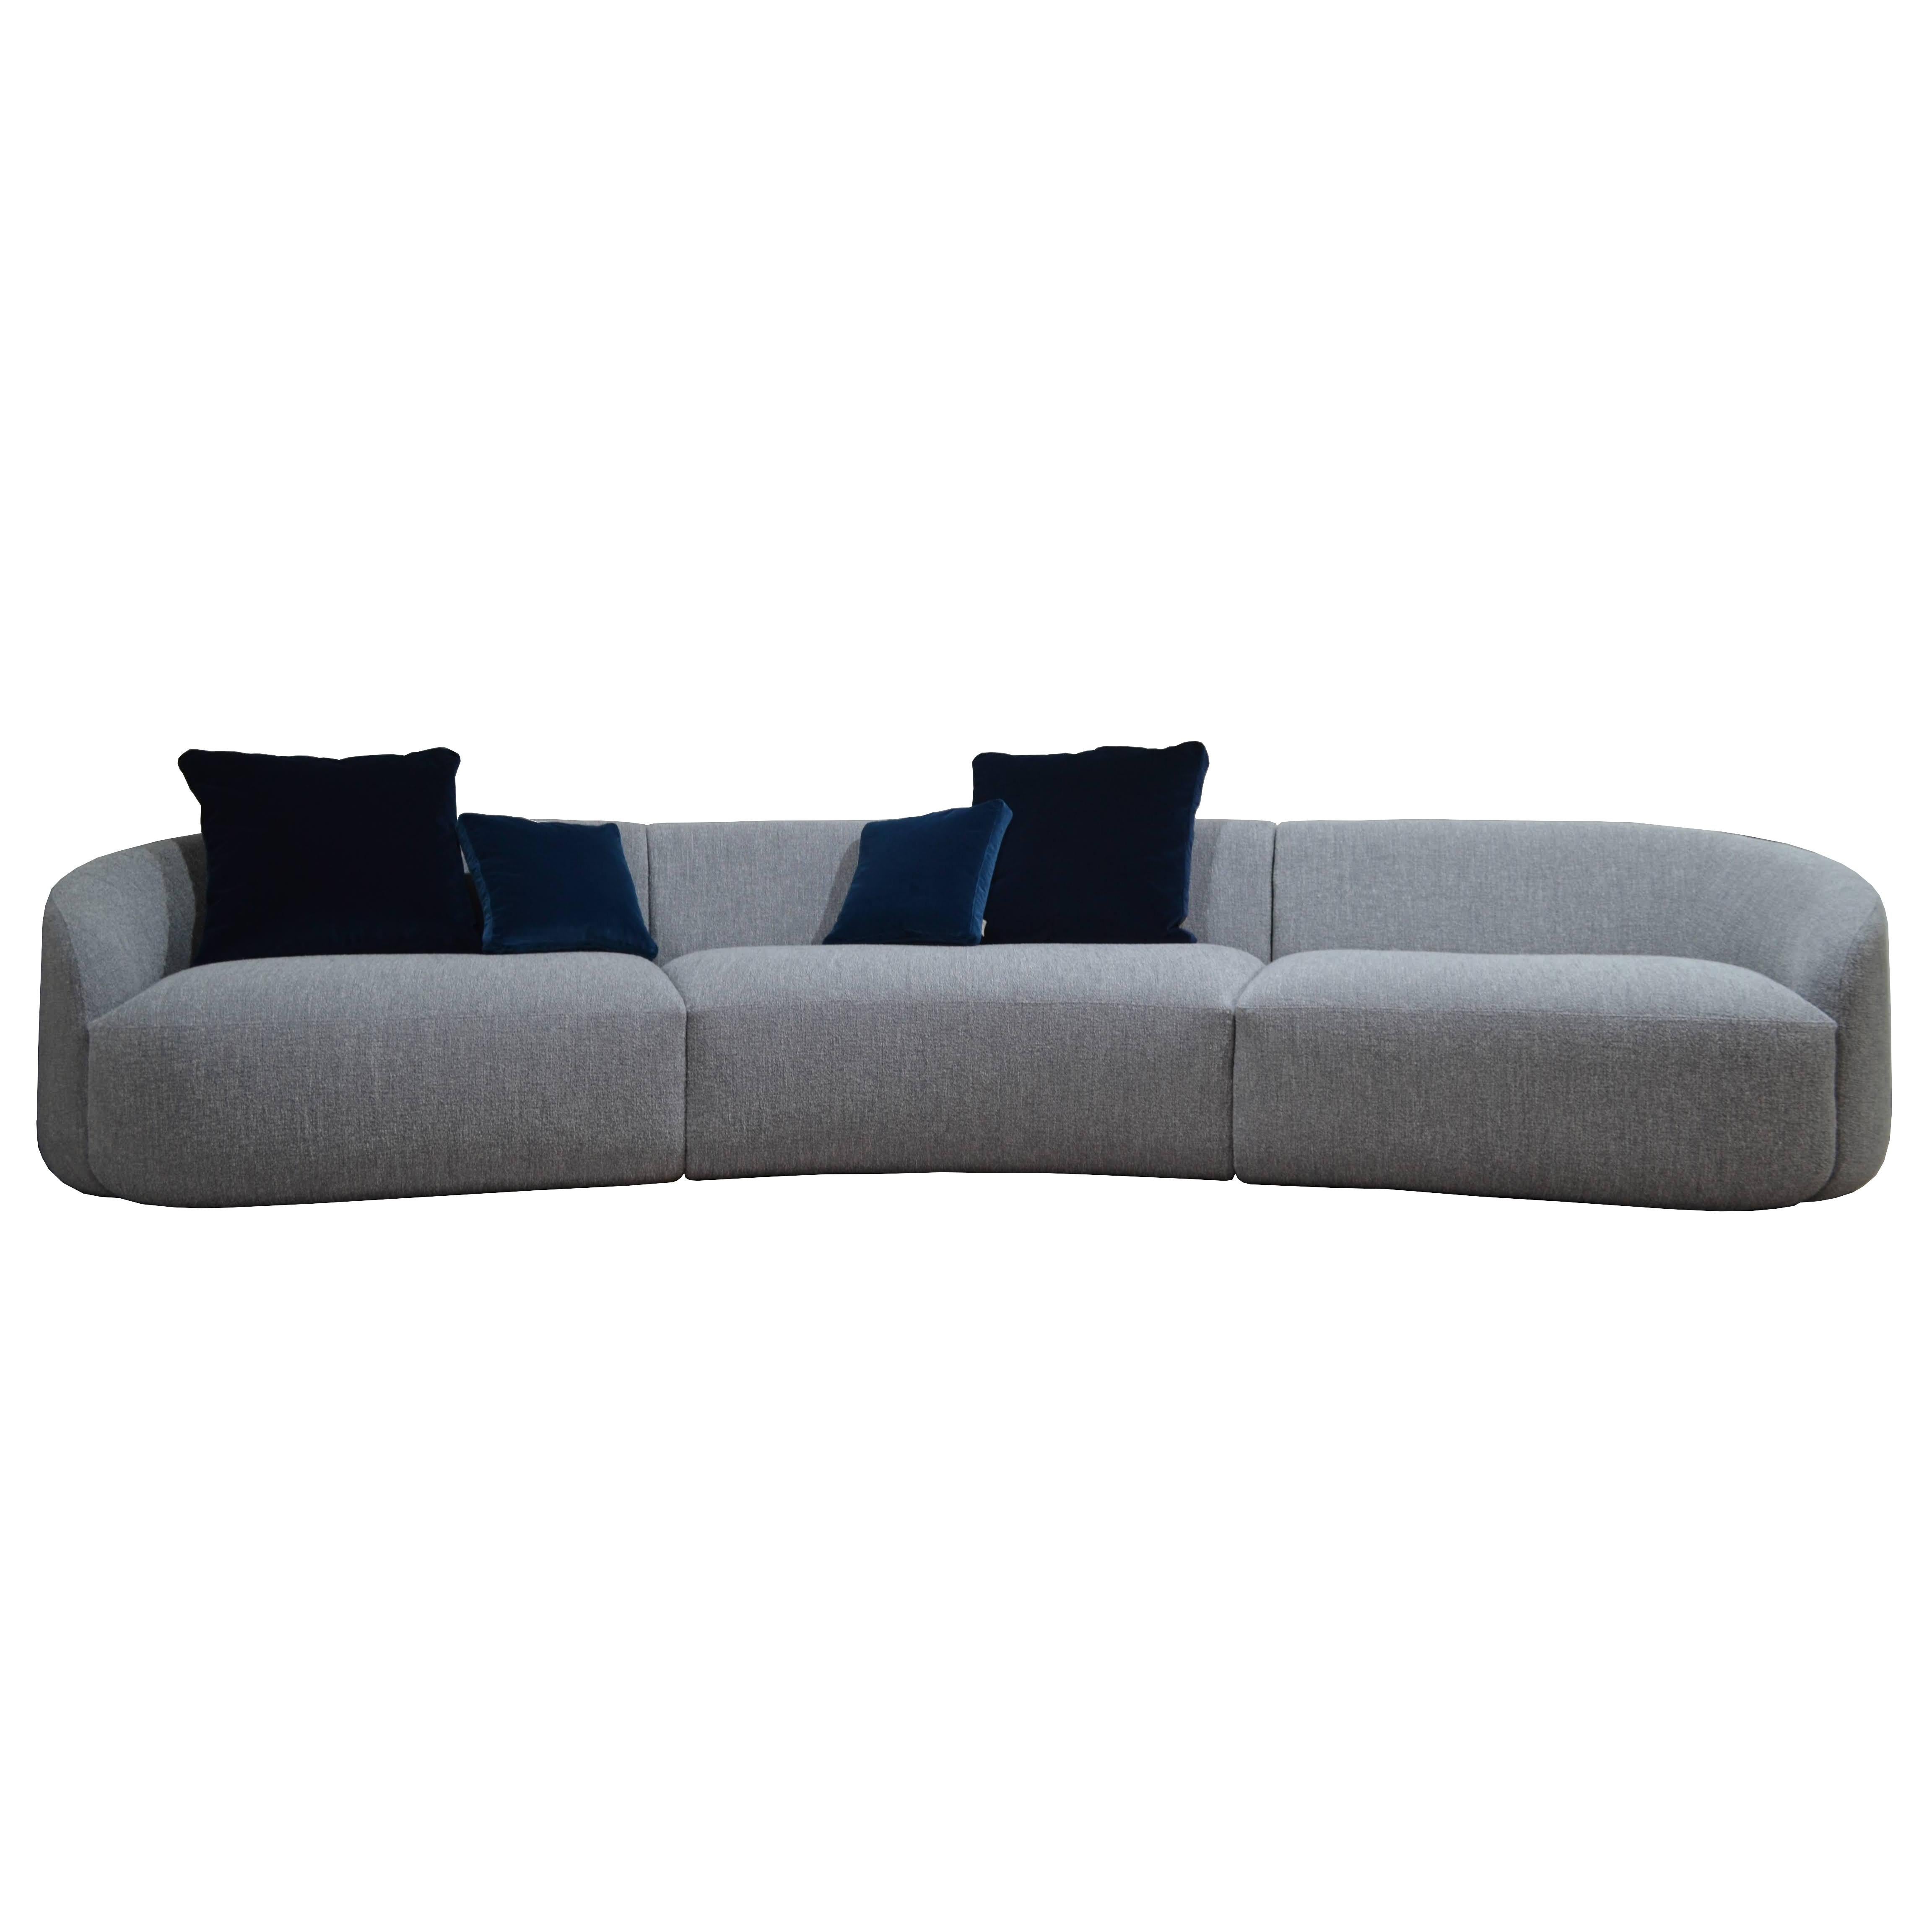 The rounded, curved shape, is crafted into the unique and original design of this well-proportioned and visually distinctive sofa series, available in custom sizes, ensuring intimacy and convivial socialisation in any interior. Upholstery in your